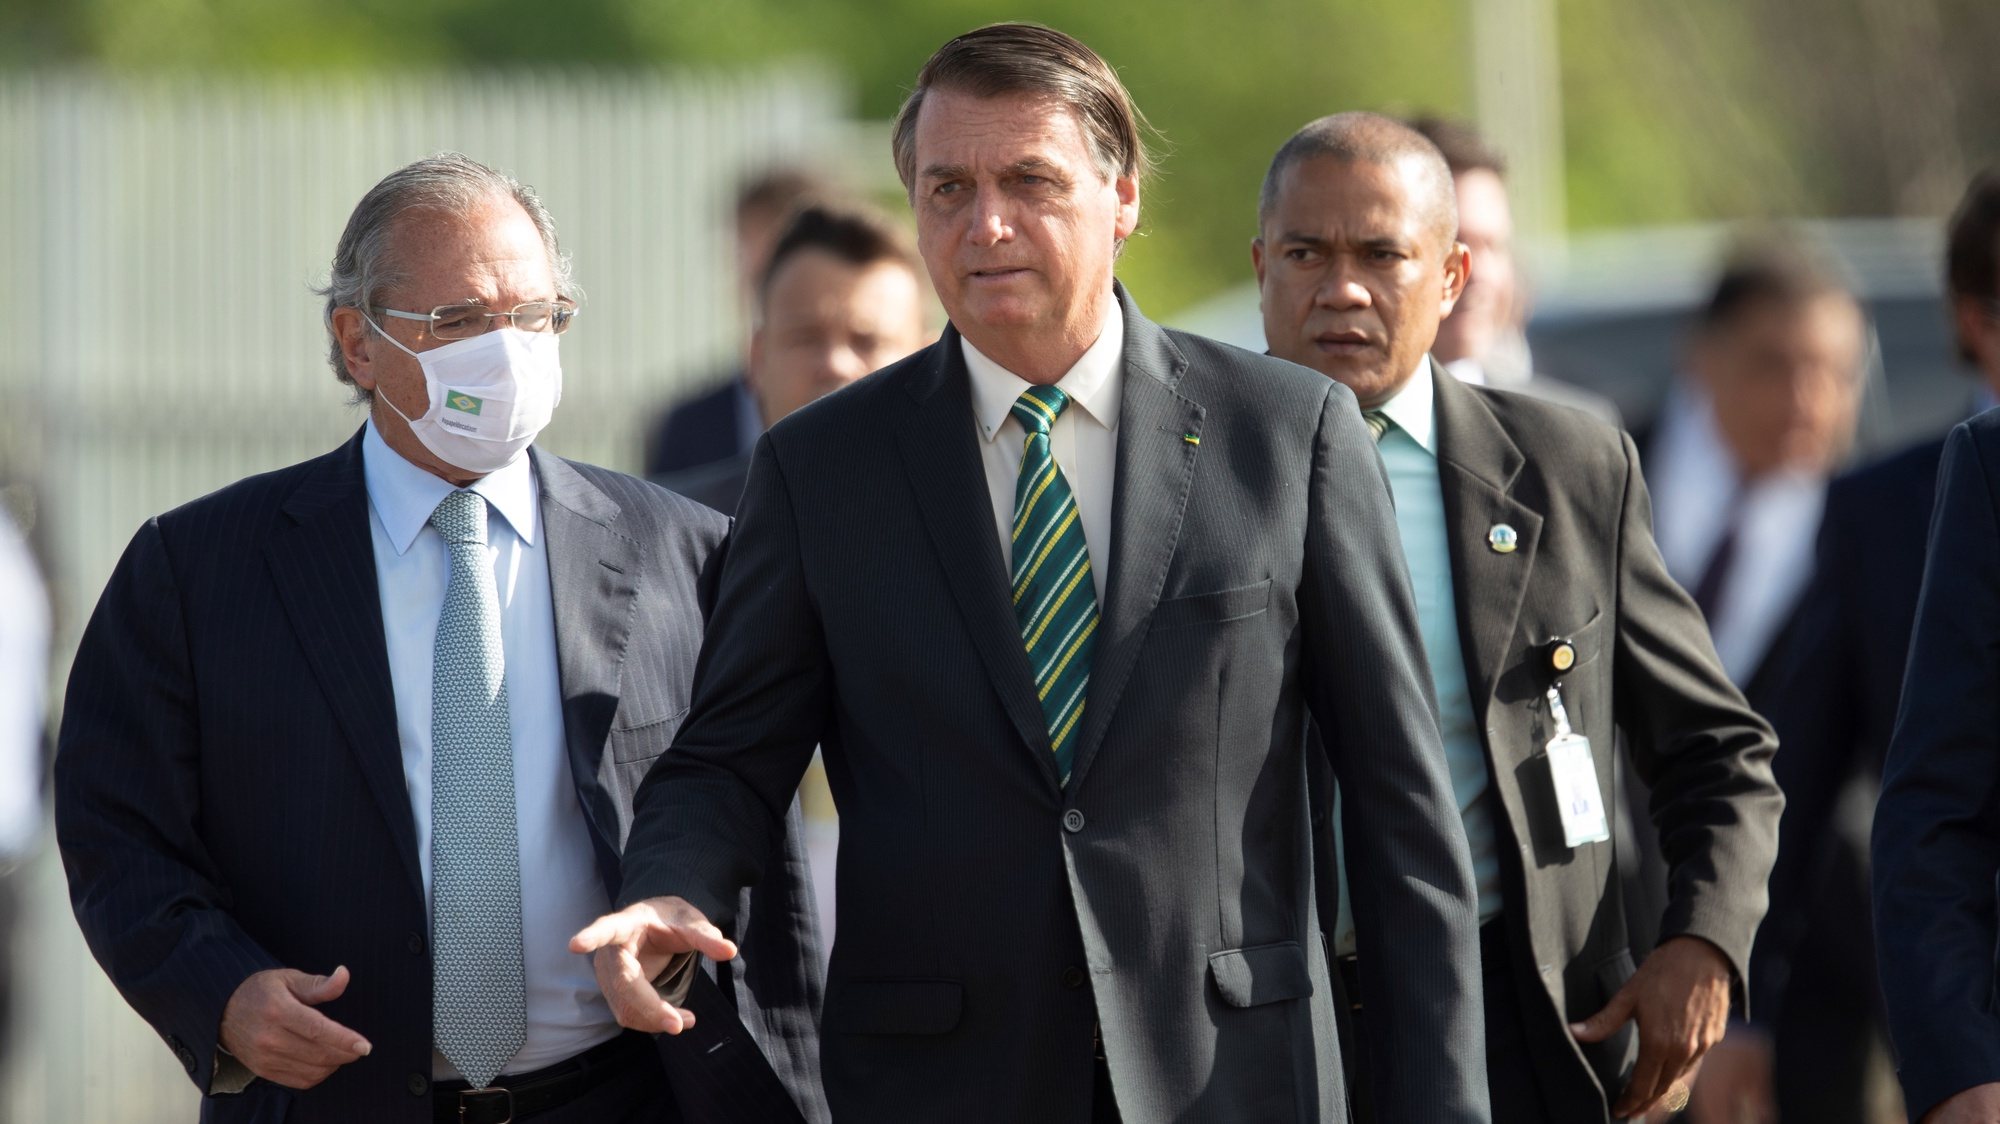 epa08777585 Brazilian President Jair Bolsonaro (C), walks with Economy Minister Paulo Guedes (L) towards the raising of the National Flag before the 38th Meeting of the Governing Council, at the Palace of the Alvorada, in Brasilia, Brazil, 27 October 2020.  EPA/Joedson Alves